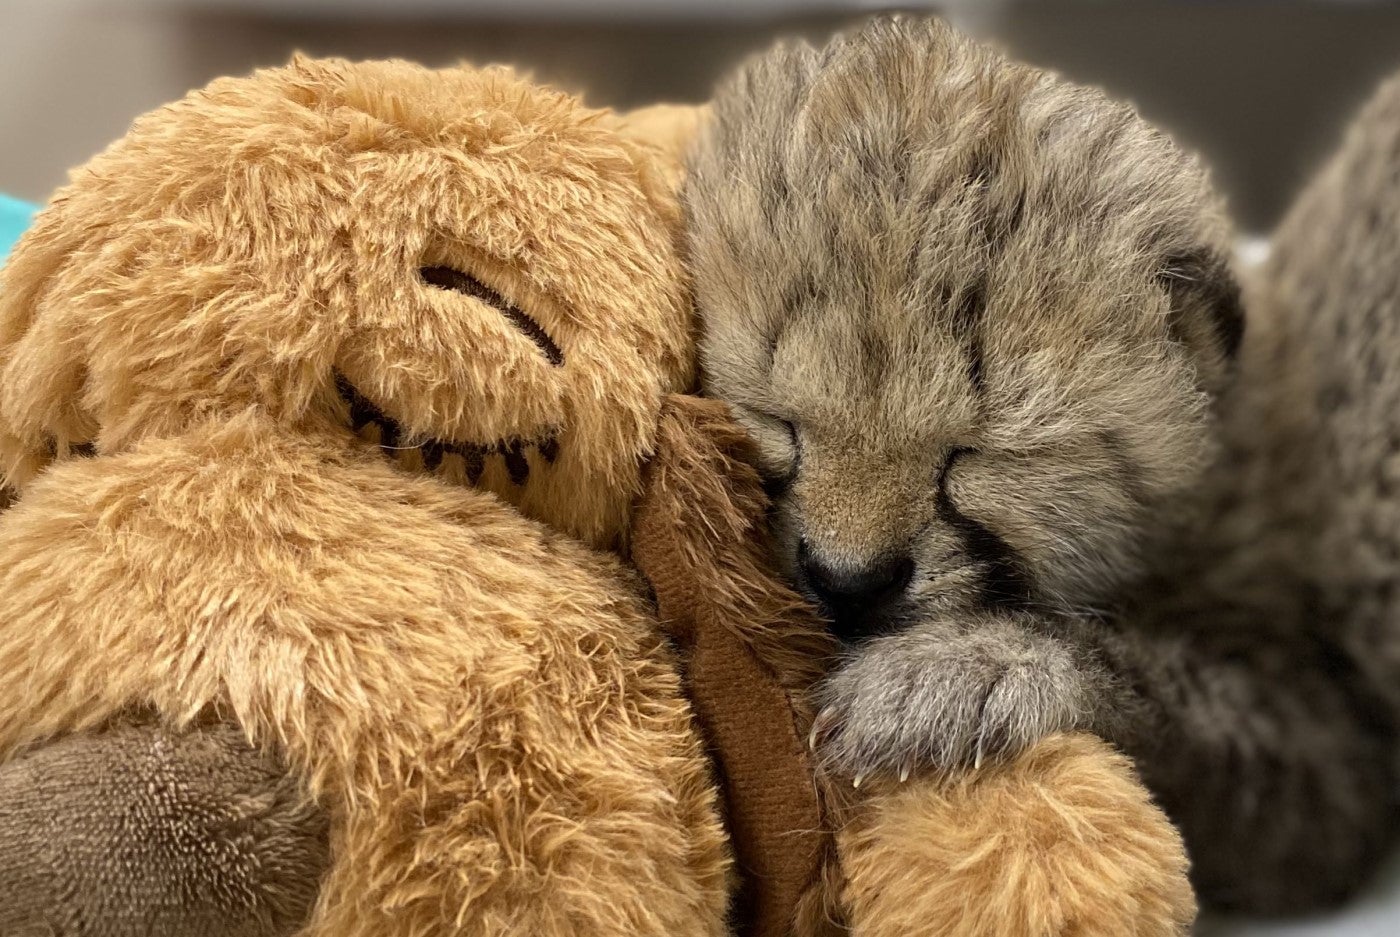 A 2-week-old cheetah cub (right) sleeps snuggled up against a light brown plush dog (left). The plush has a darker brown nose and it's eyes are sown to look like its sleeping.